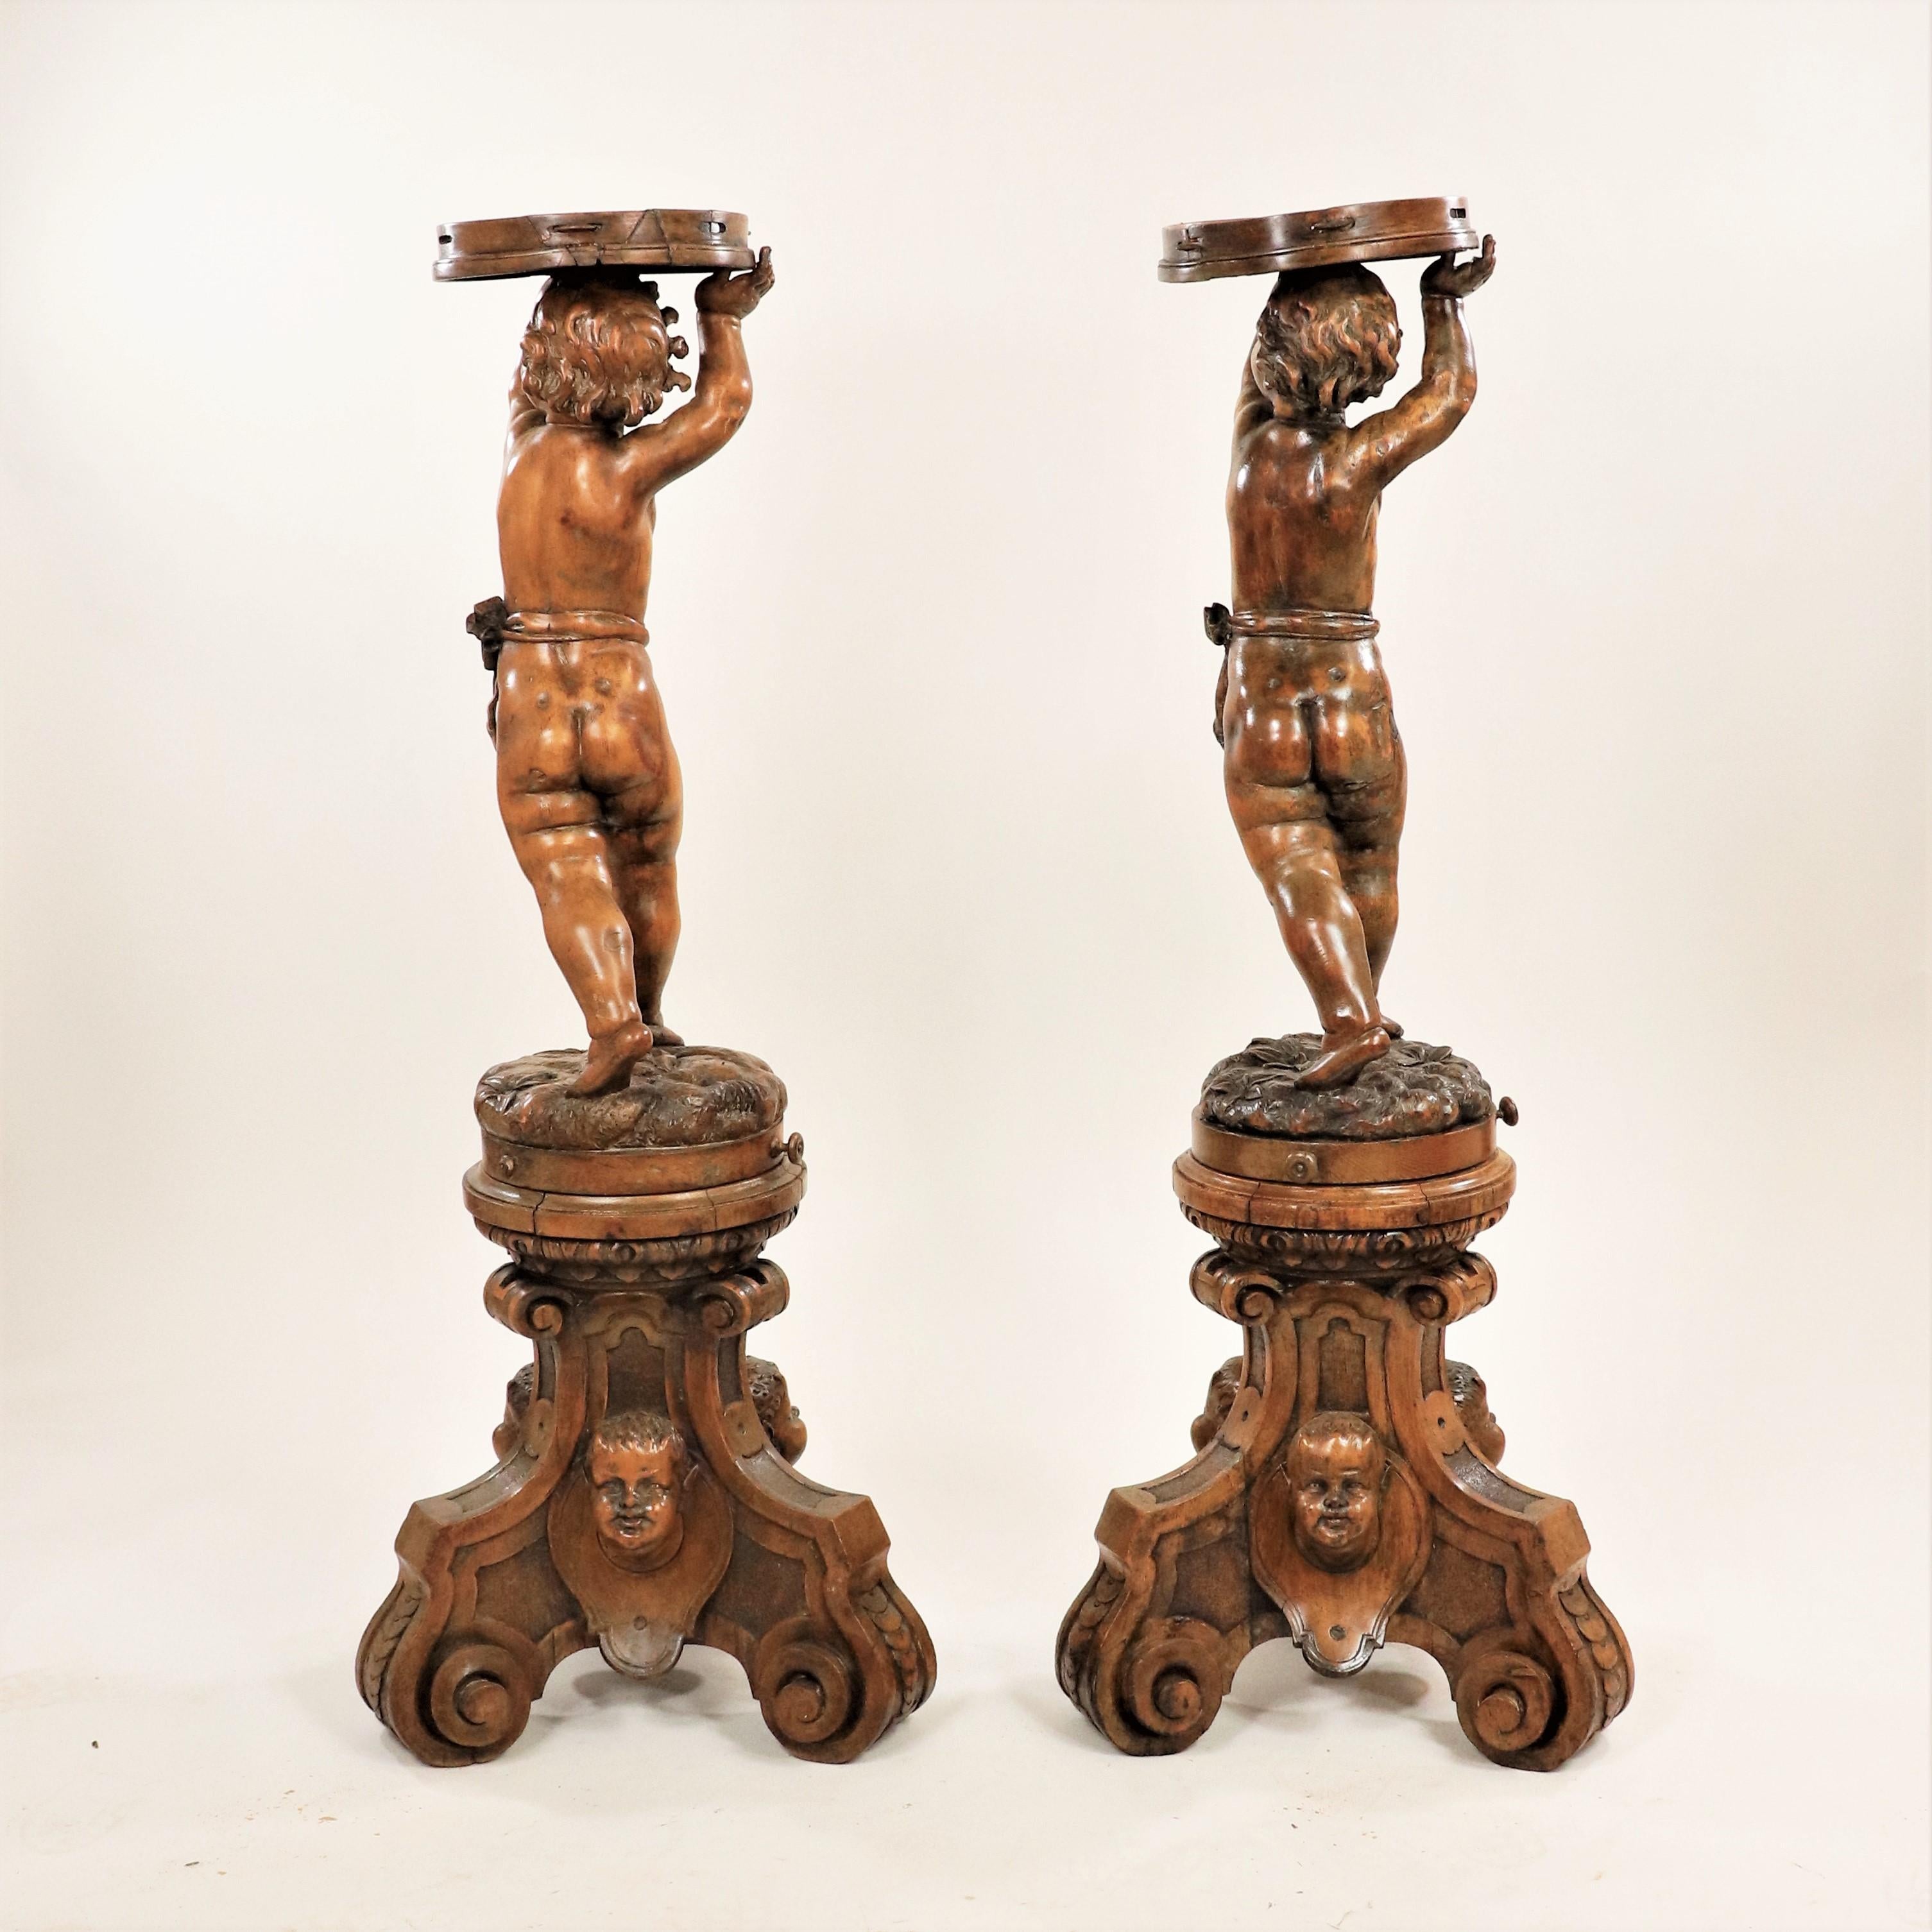 Renaissance Pair of 19th Century Italian Carved Wood Figures of Cherubs/Putti For Sale